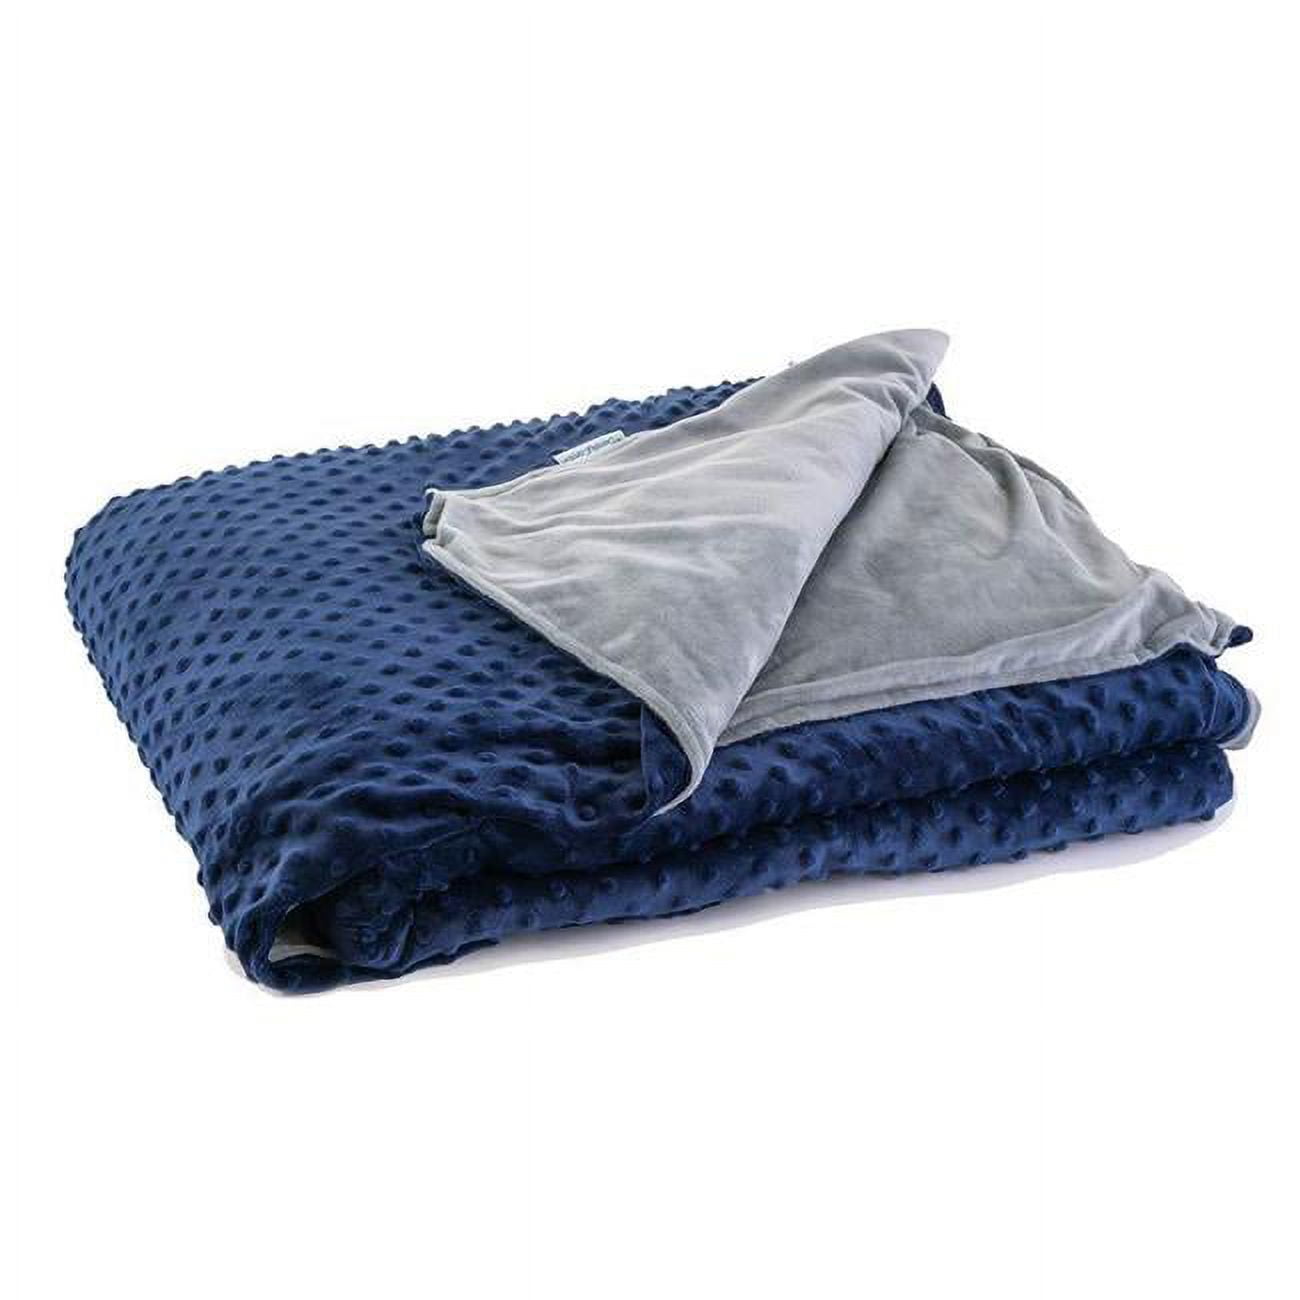 Dcwb4060-10-gryblumdc-ws 41 X 60 In. 10 Lbs Kids Weighted Blanket Minky Cover - Navy & Gray